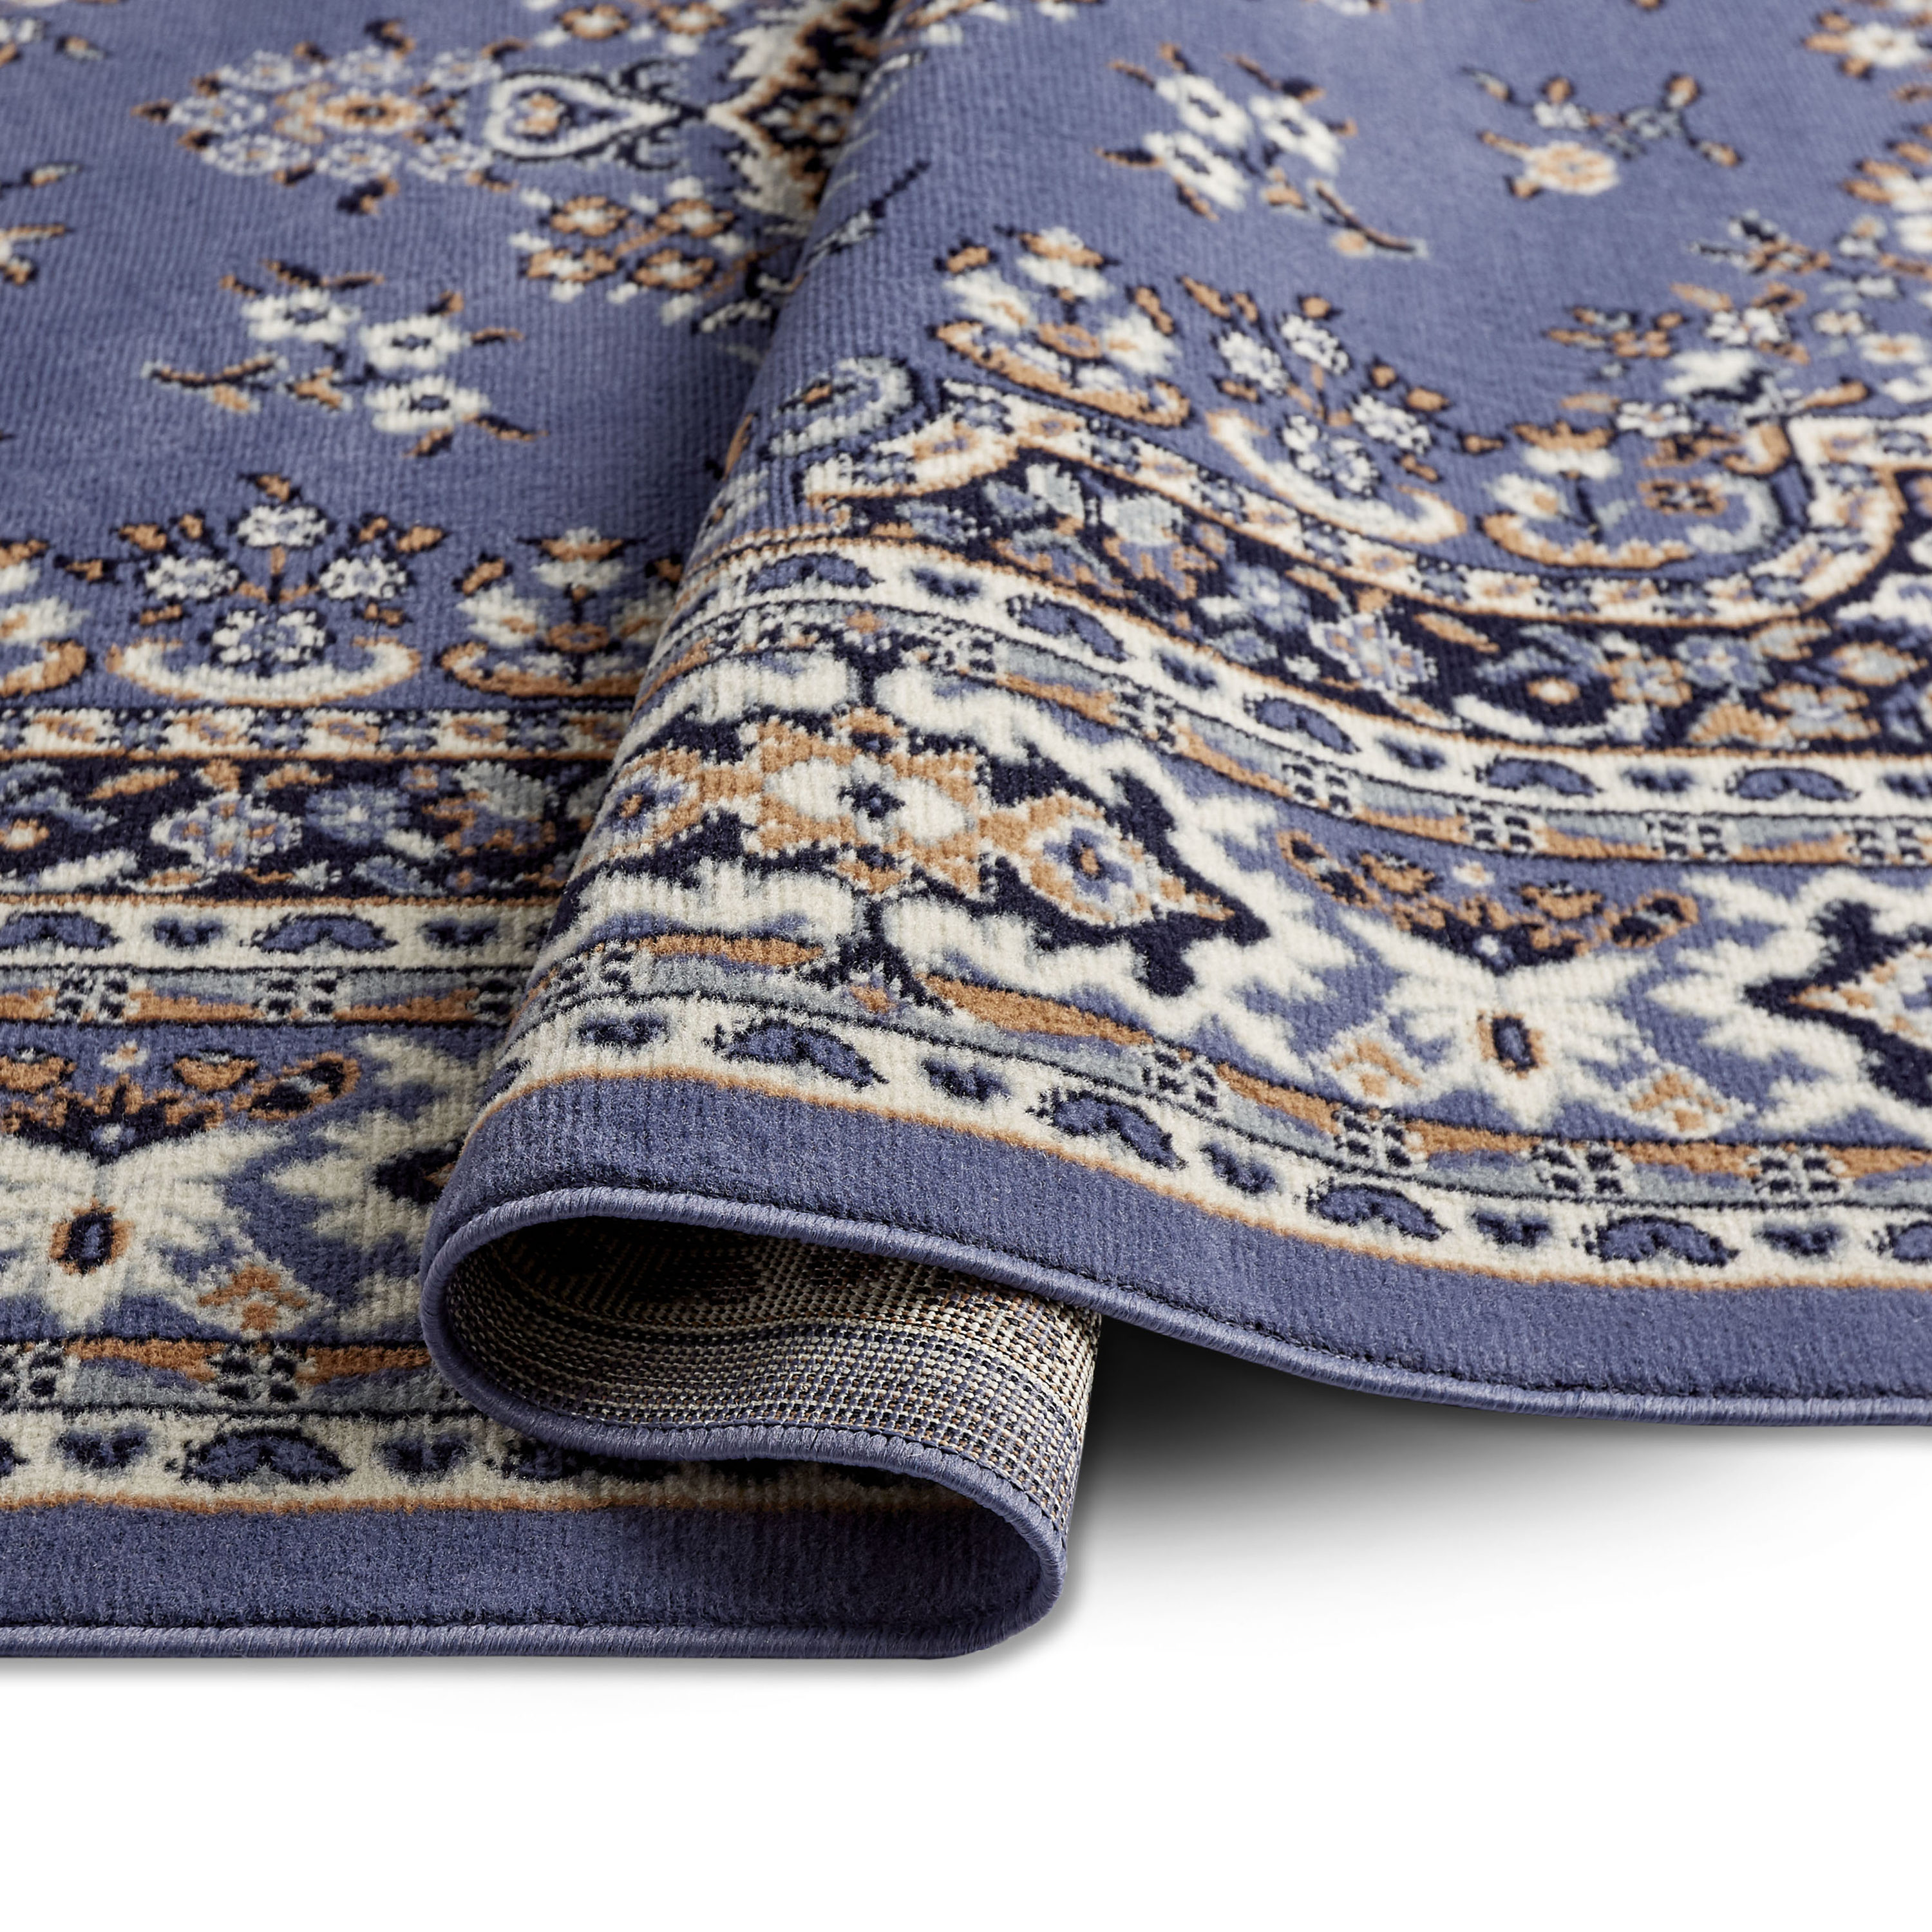 Home Dynamix Area Rugs: Premium Rug: 7069: Navy Blue